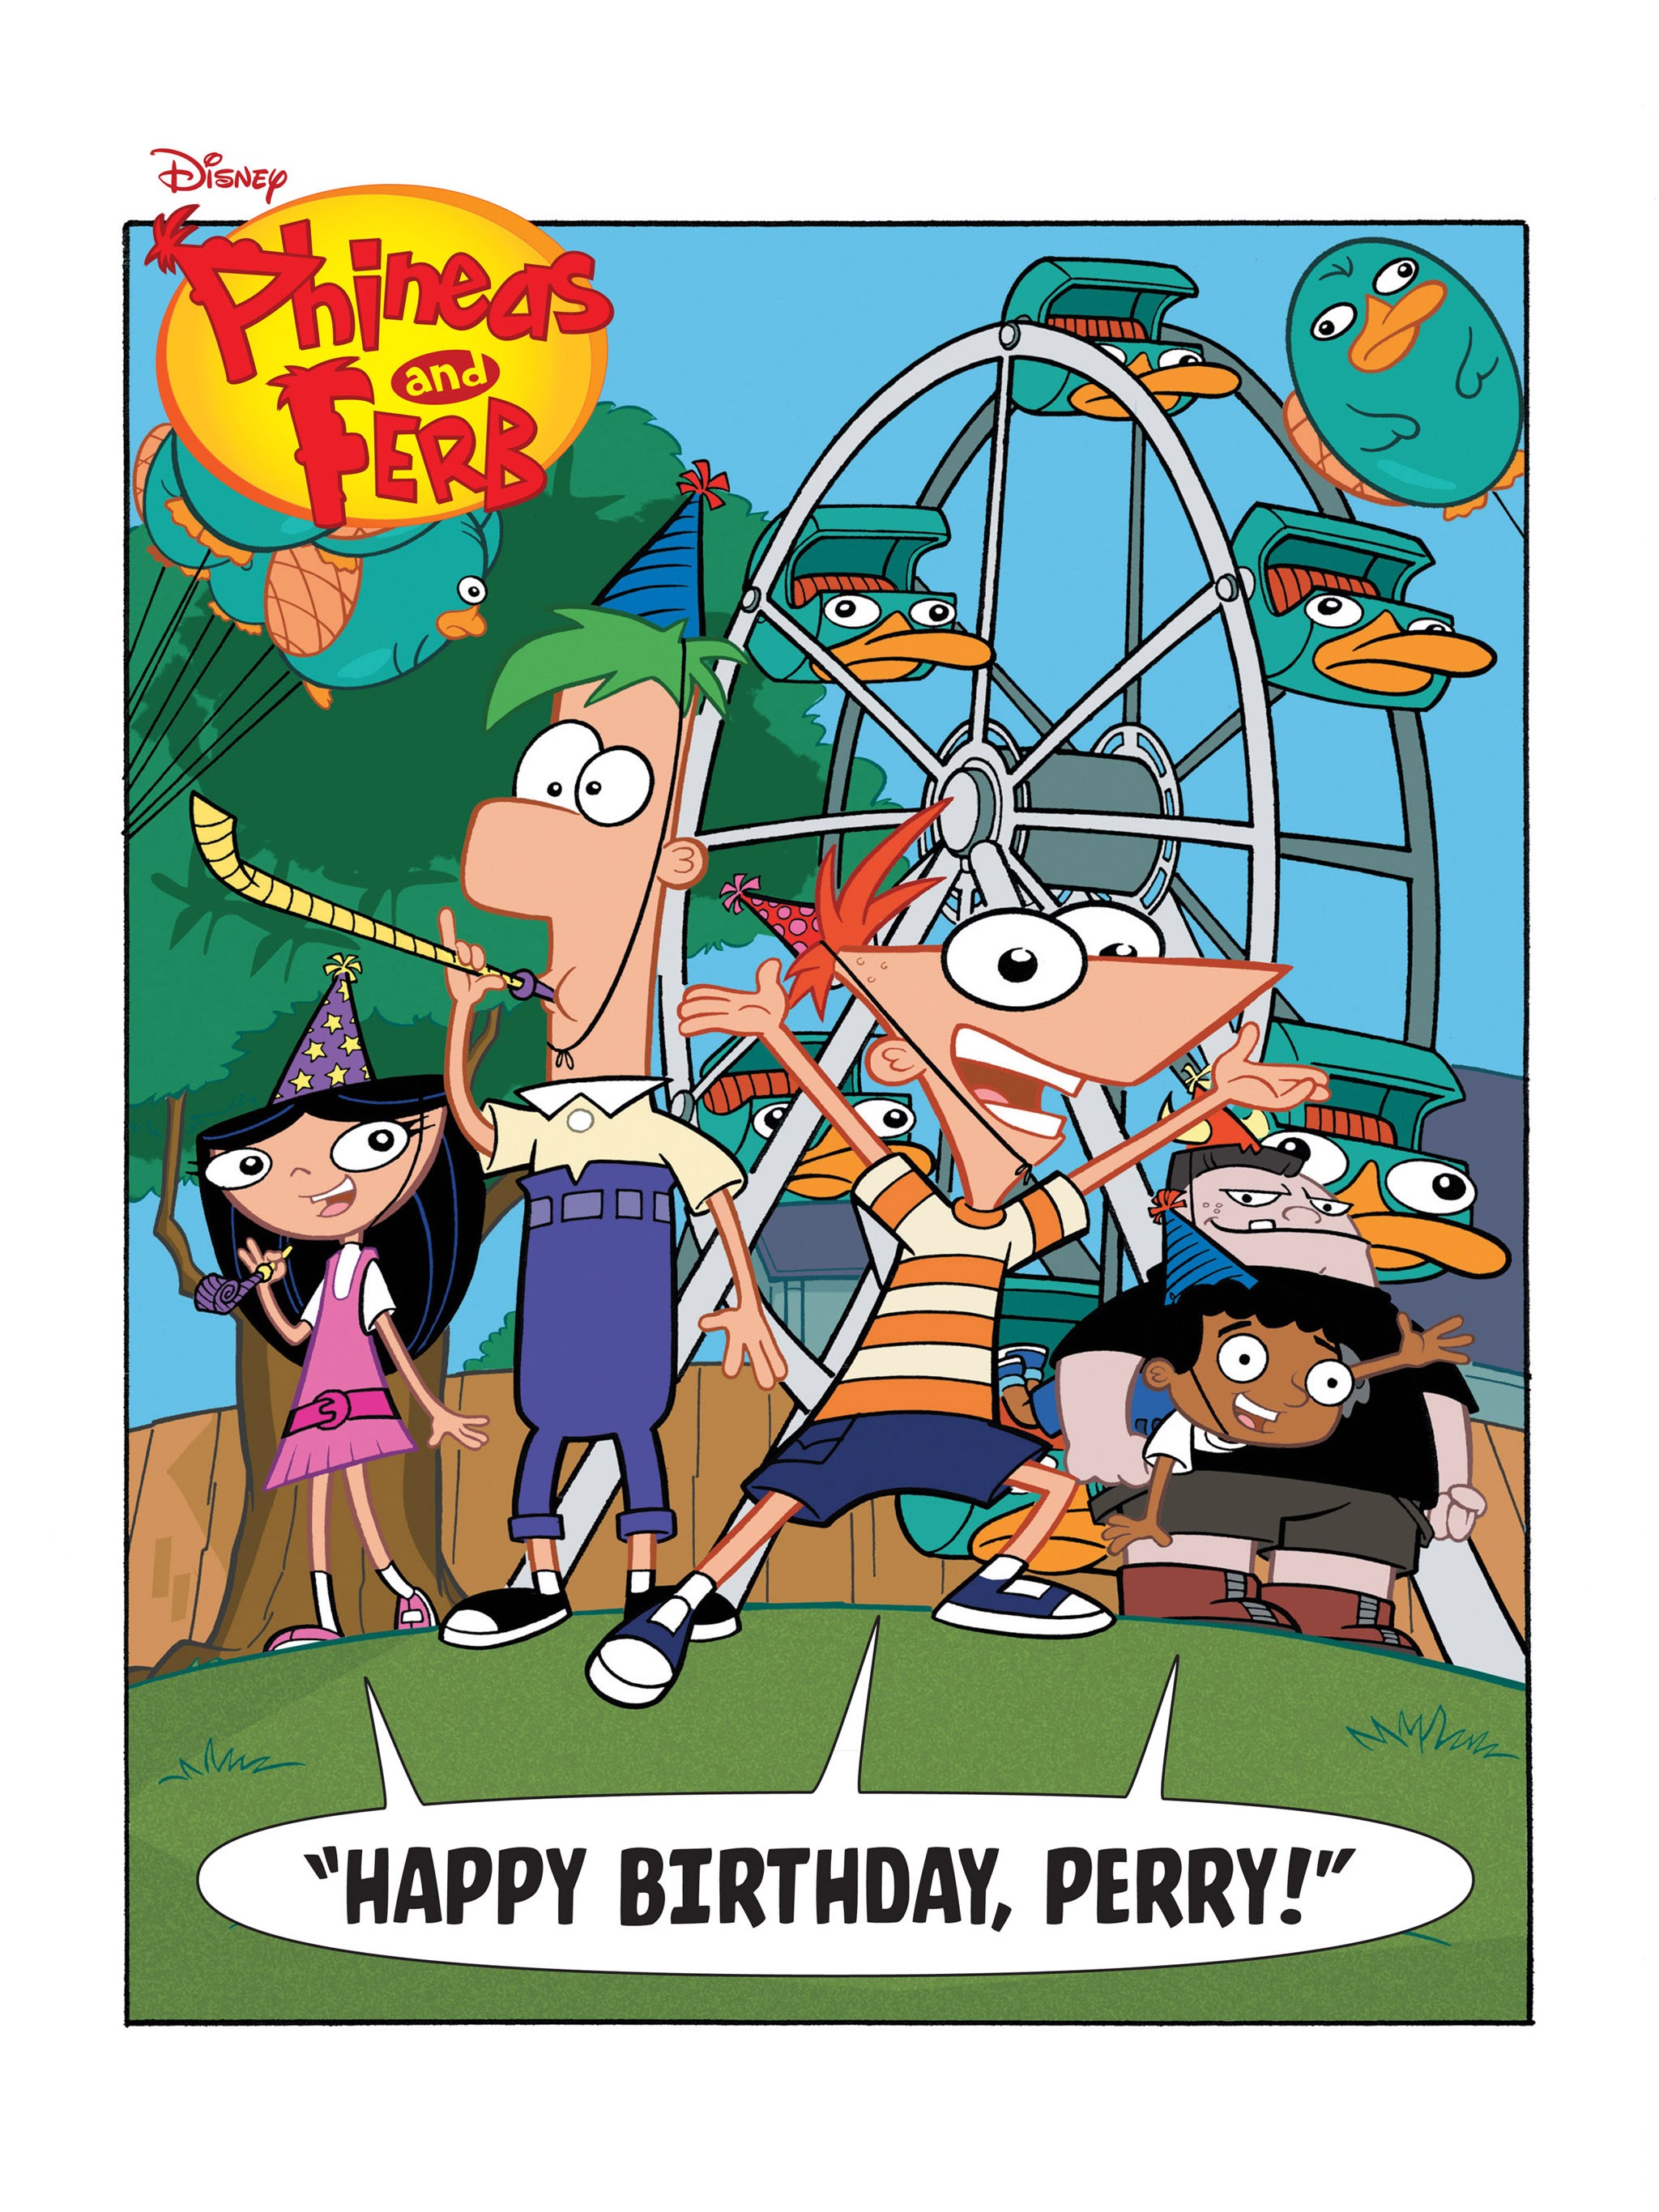 Phineas And Ferb Full | Read Phineas And Ferb Full comic online in high  quality. Read Full Comic online for free - Read comics online in high  quality .|viewcomiconline.com